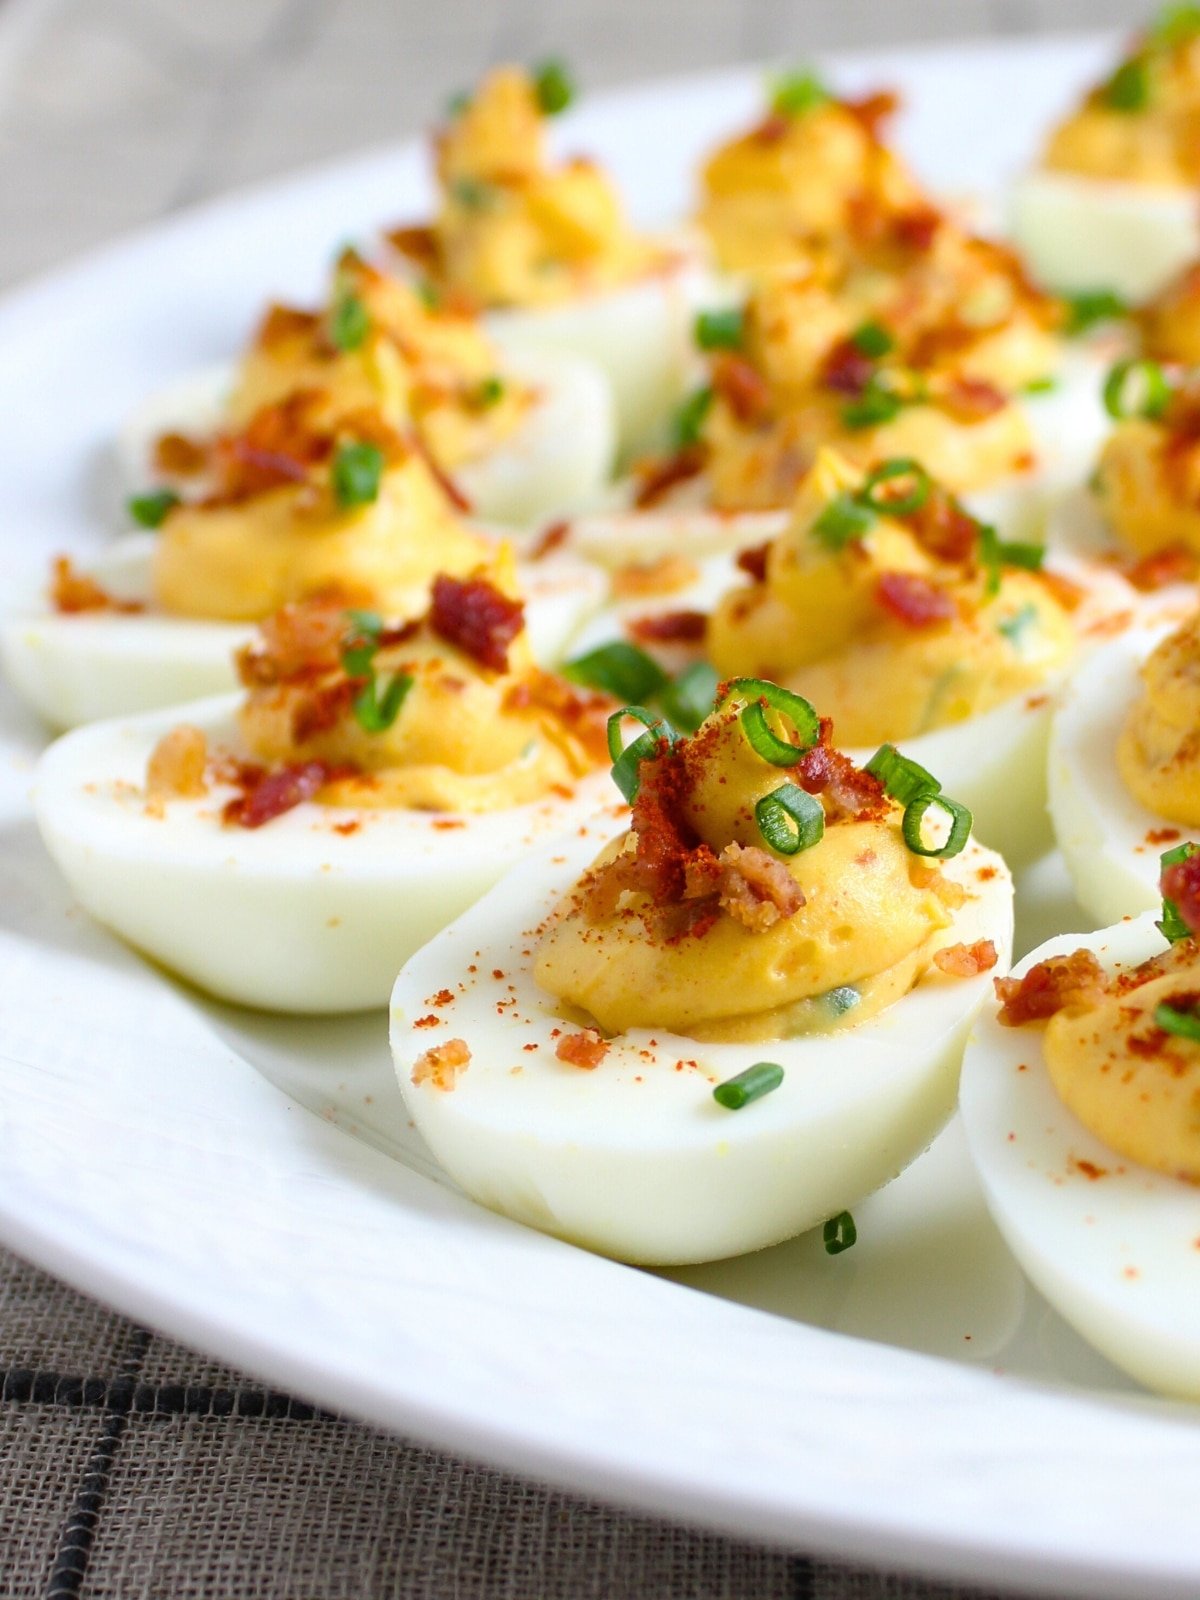 Smoky Deviled Bacon and Eggs on a platter - a delicious appetizer.